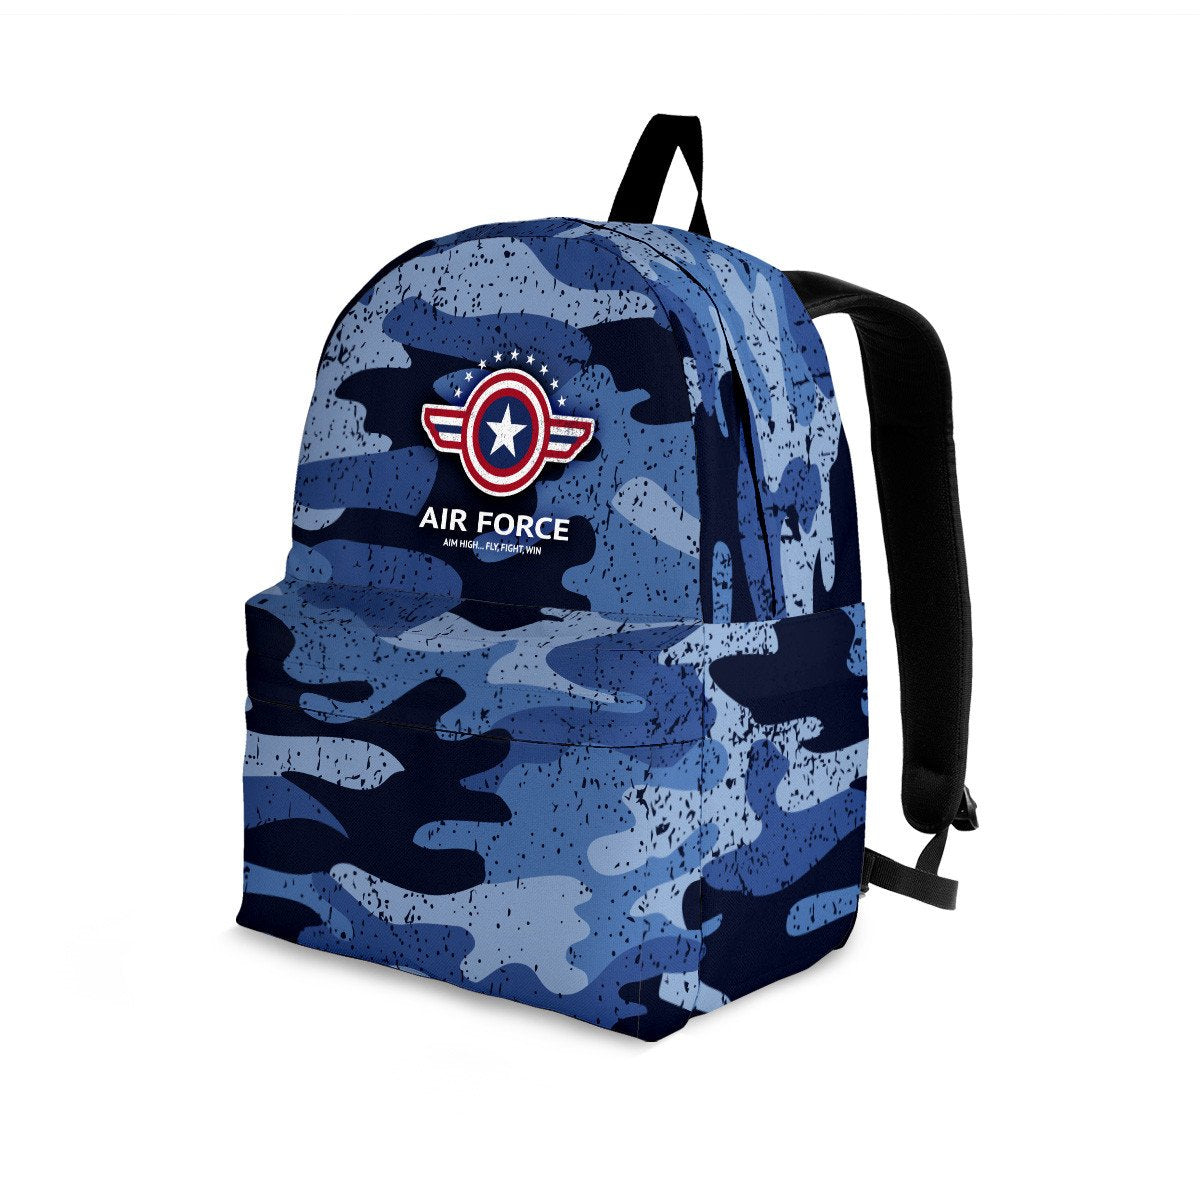 Air Force Backpack